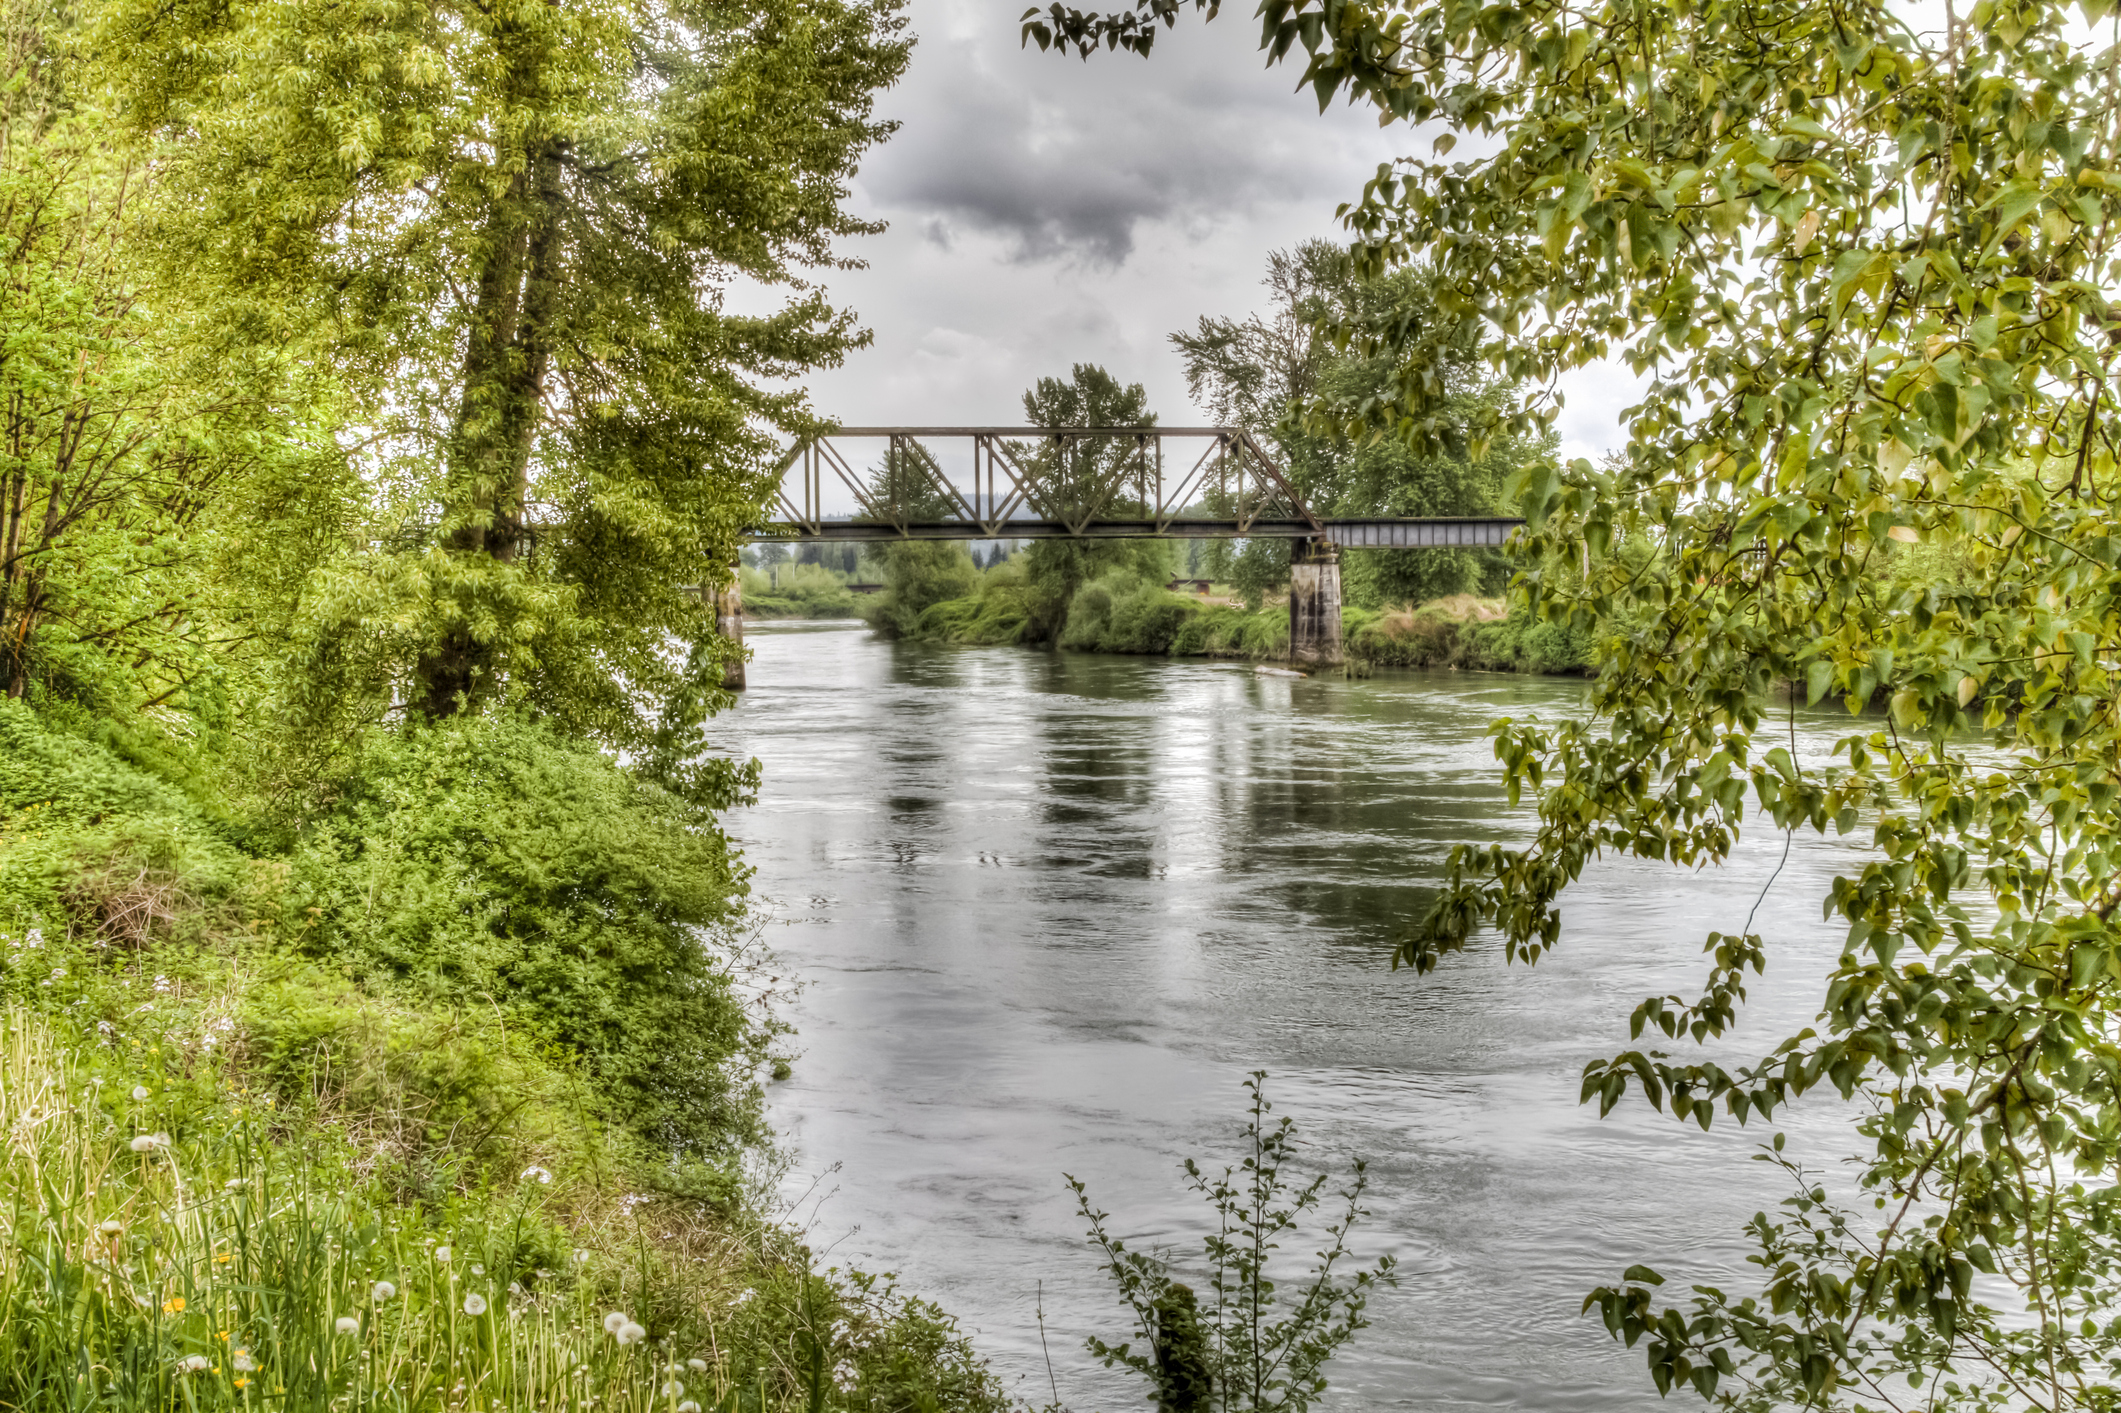 The Snohomish River in Washington.